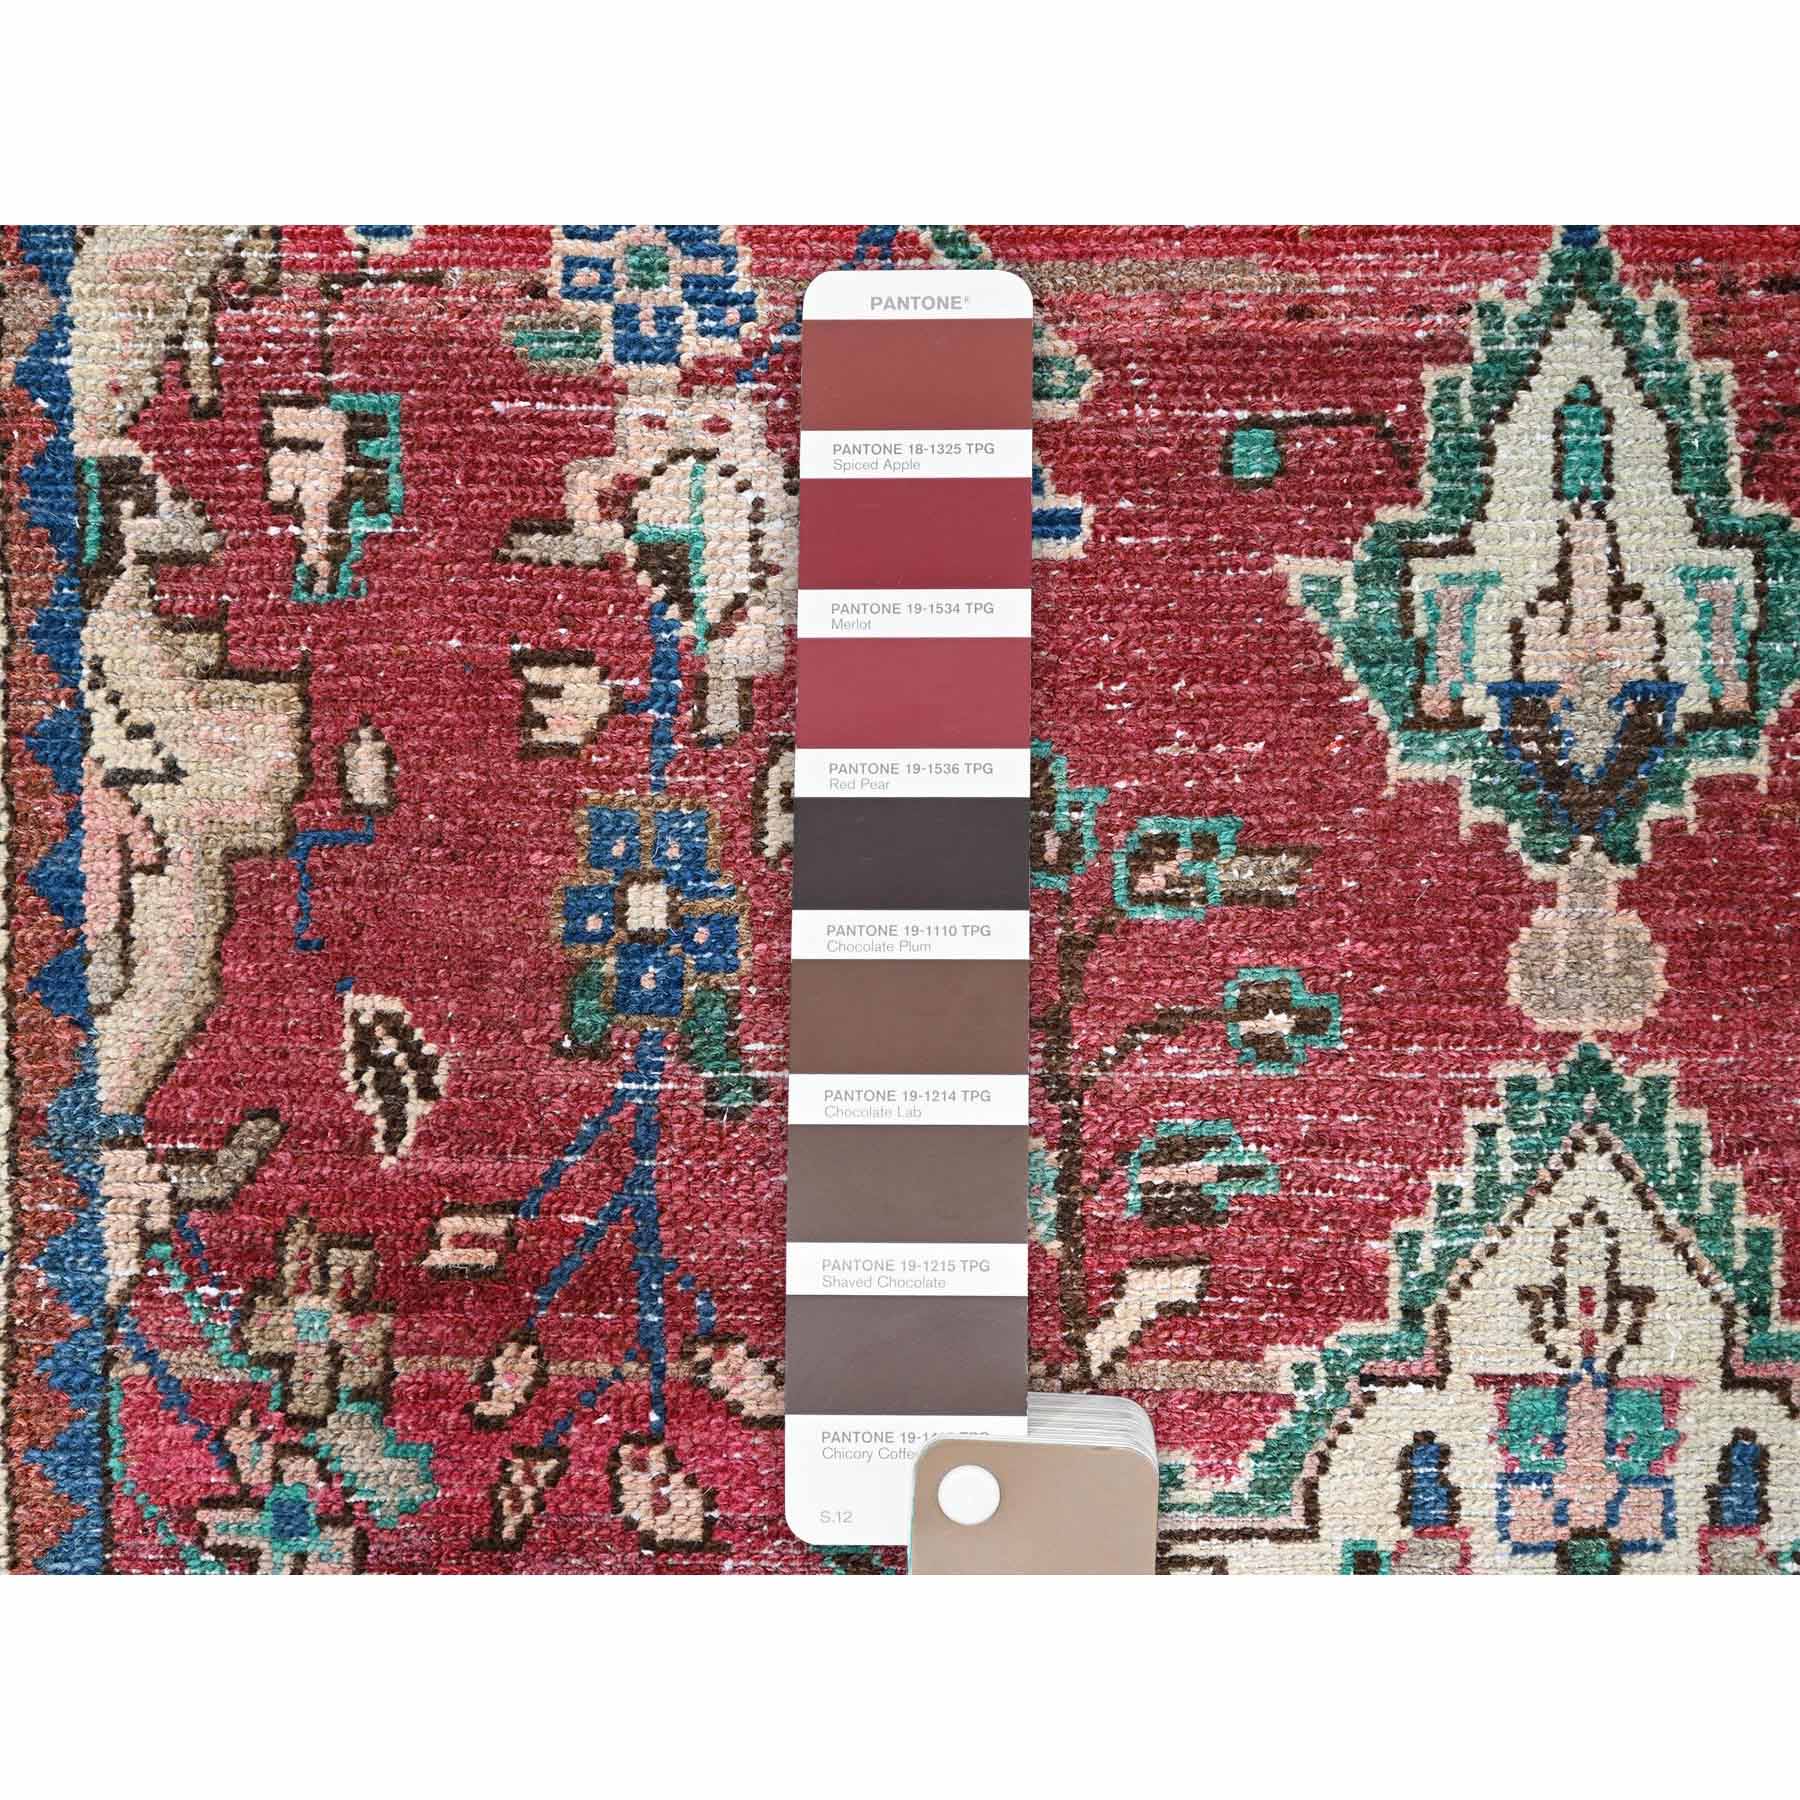 Overdyed-Vintage-Hand-Knotted-Rug-430195